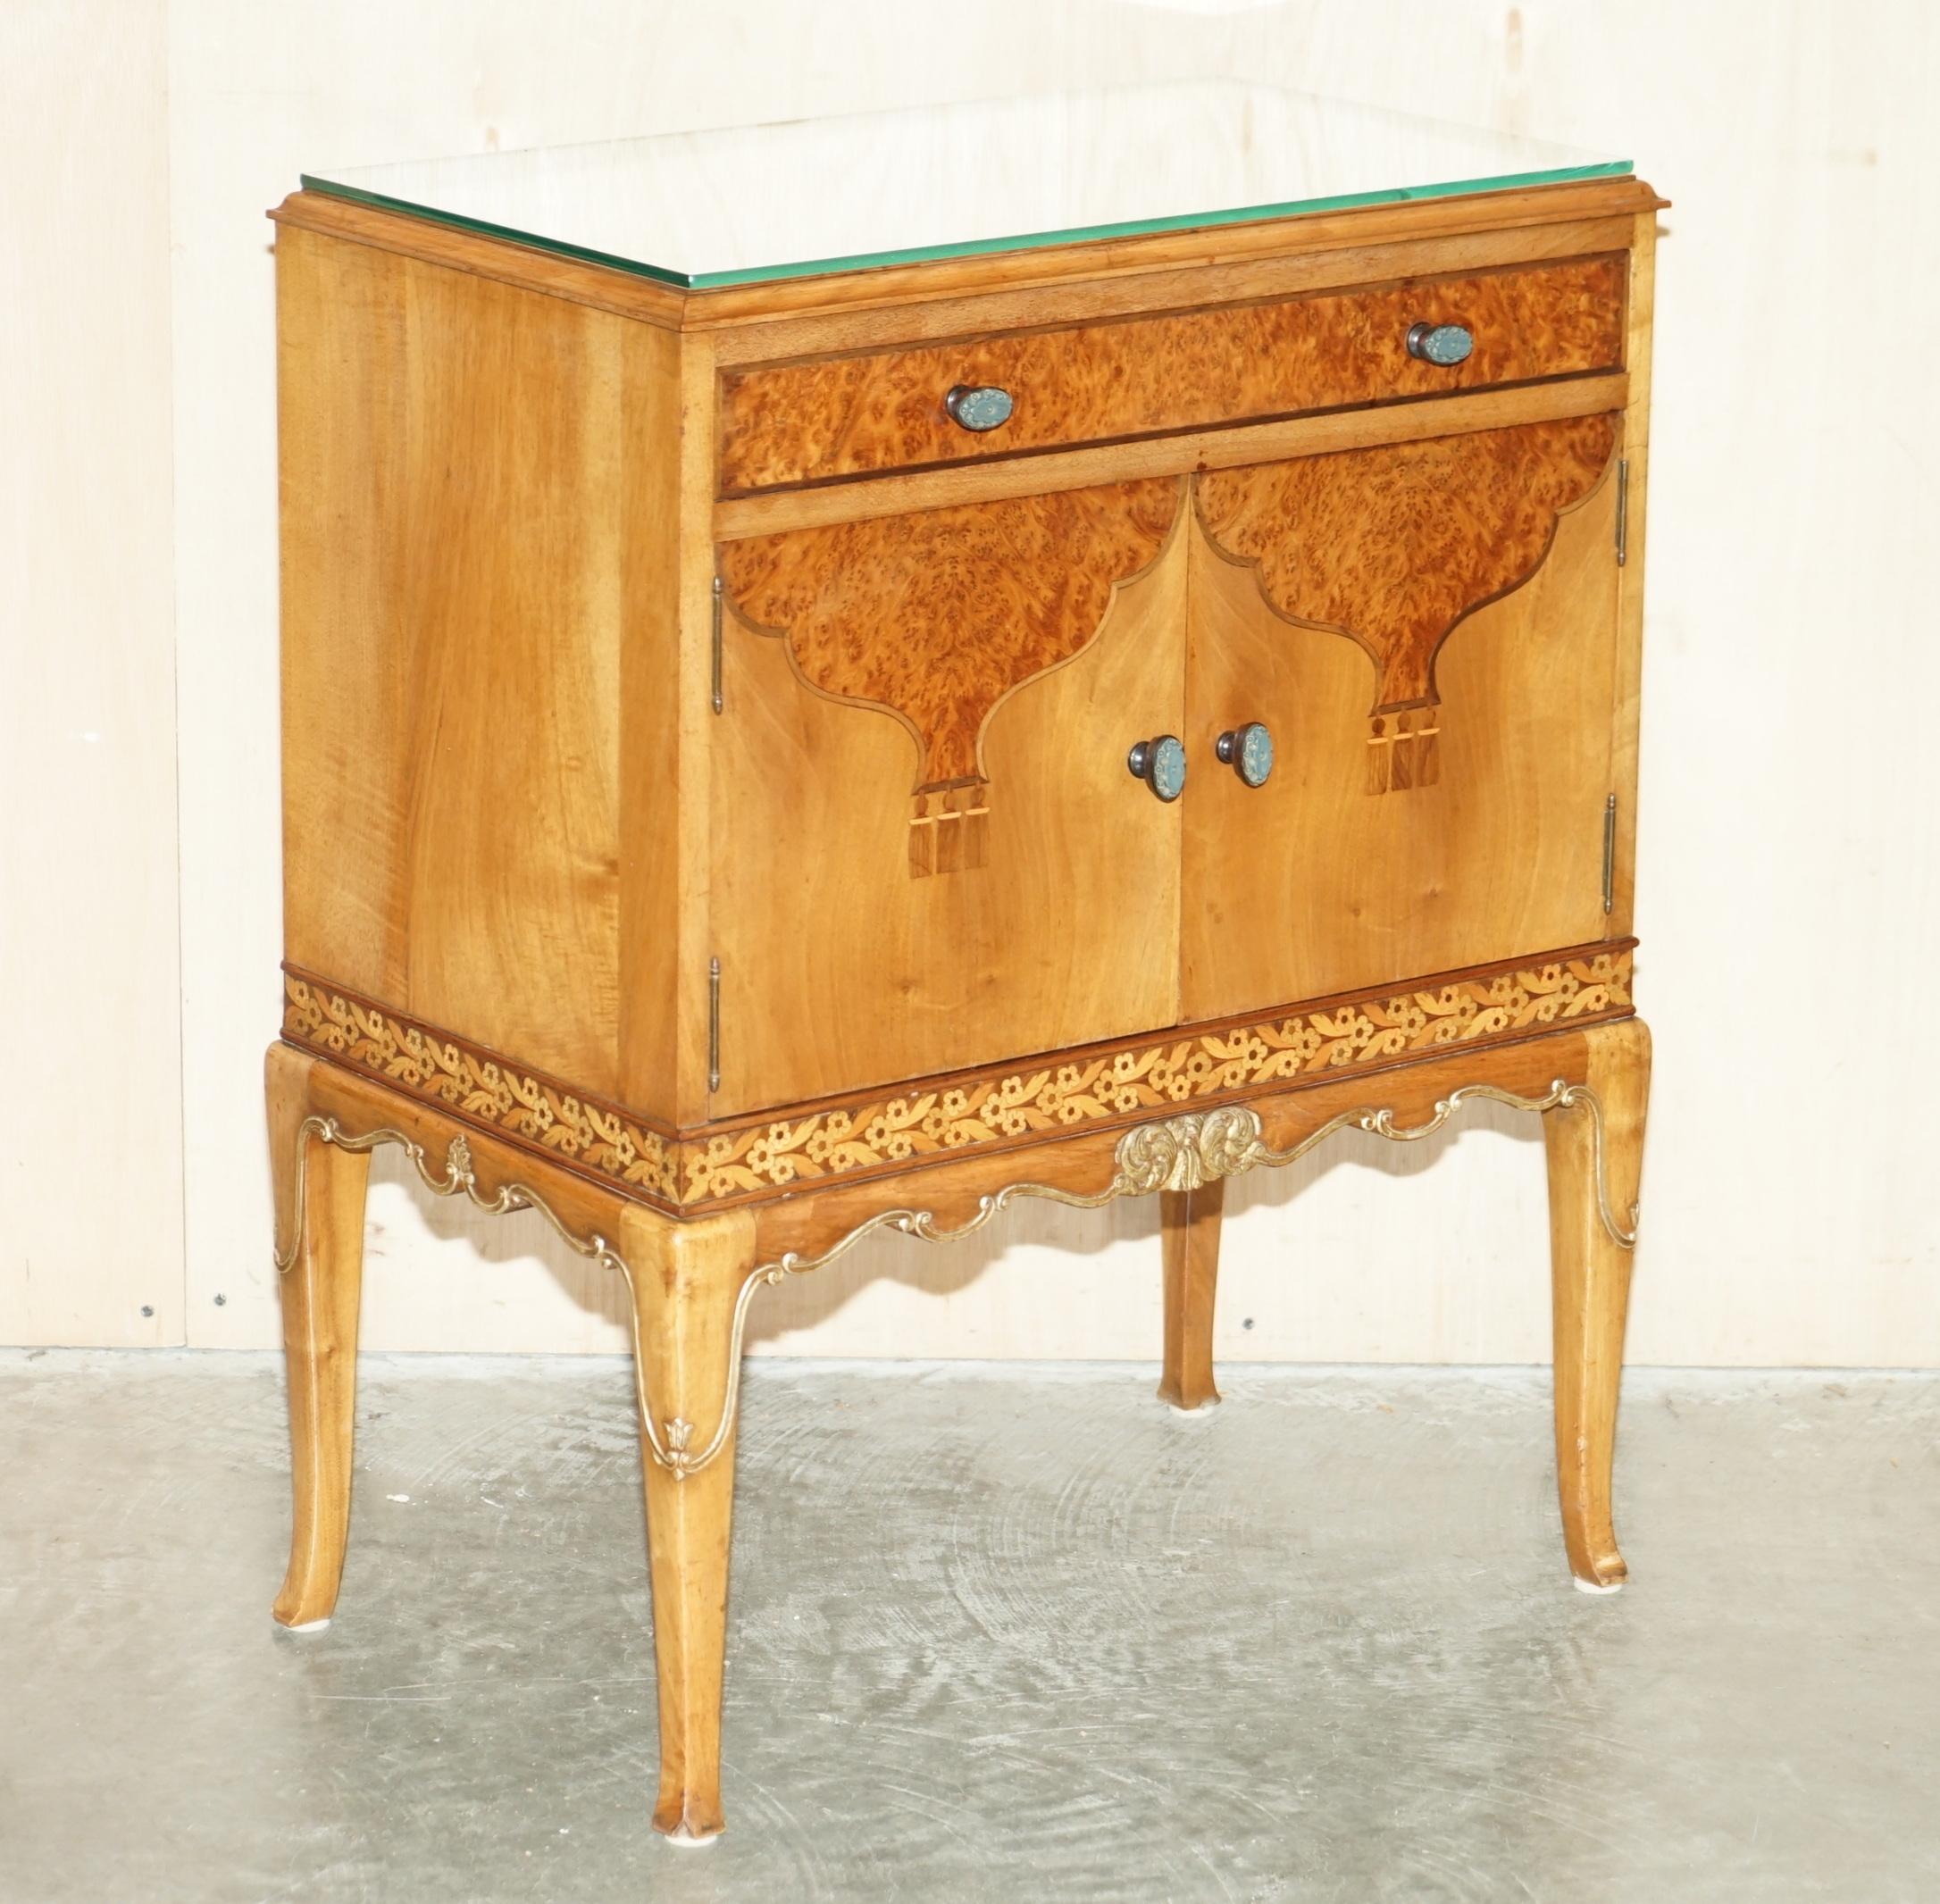 We are delighted to offer for sale this finest quality Waring & Gillow Lancaster, Burr Walnut inlaid large bed side table which is part of a large suite

This piece is part of a bedroom set, I have in total a triple bank wardrobe, dressing table